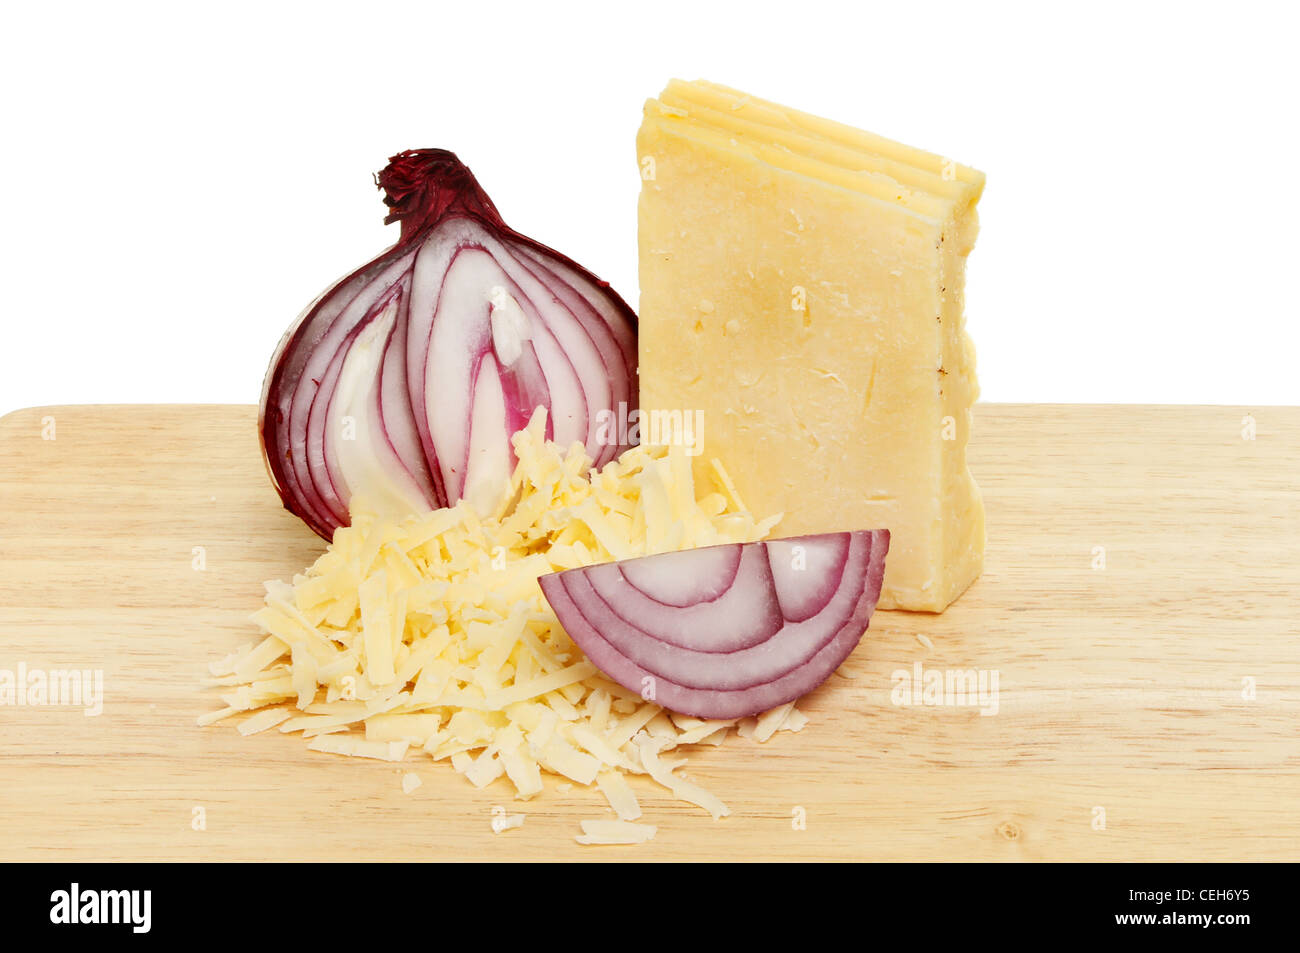 Cheddar cheese and red onion on a wooden food preparation board Stock Photo